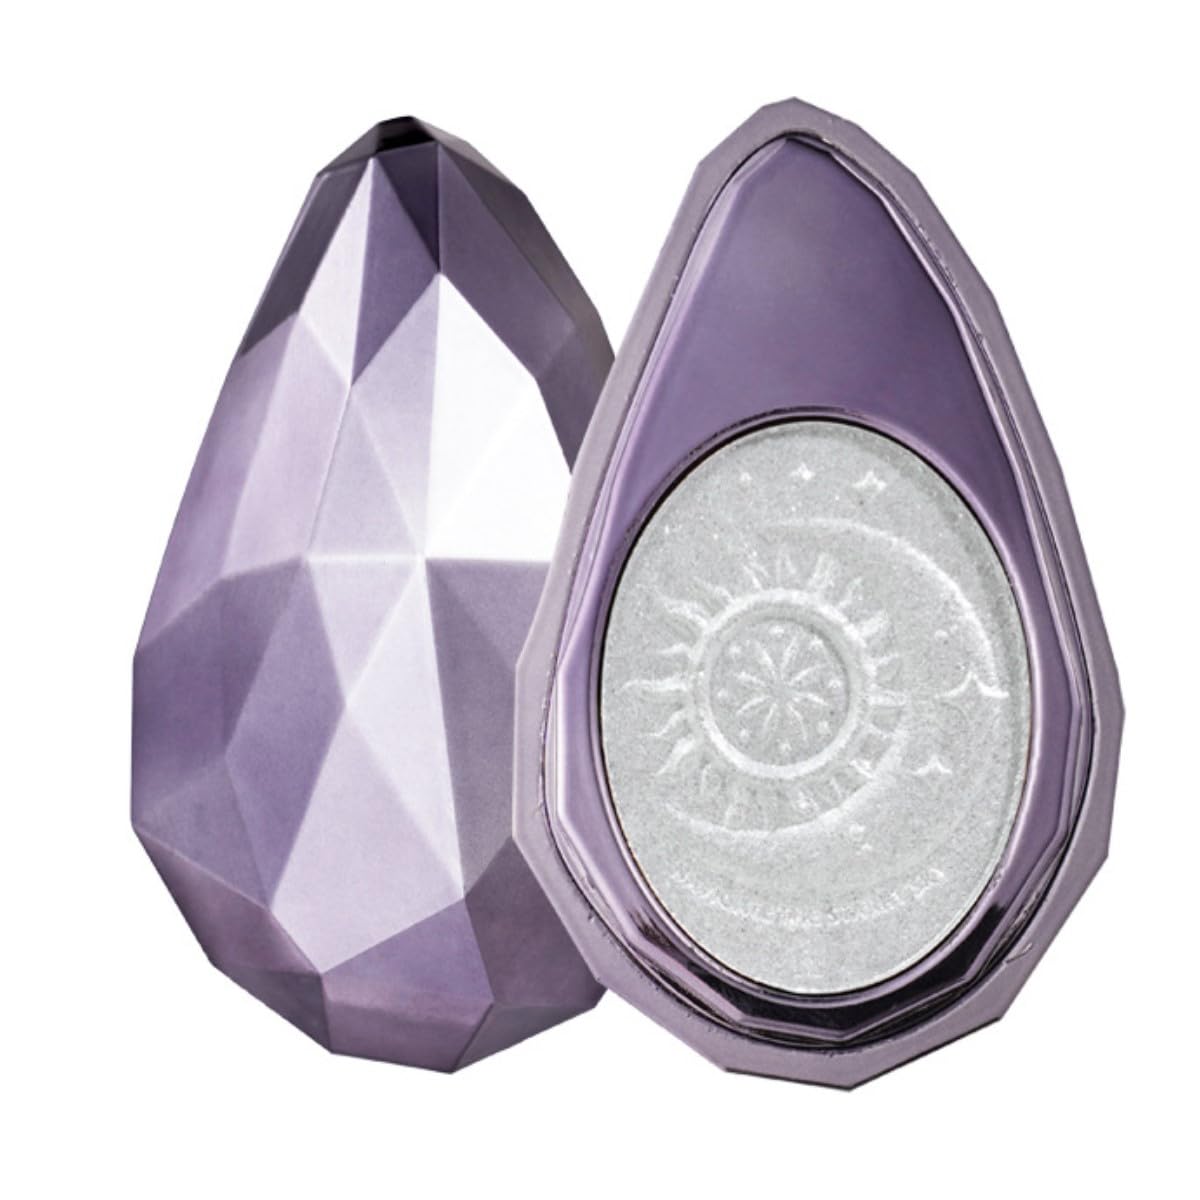 KARLOR Highlighter Palette Purple Diamond Highlighter Powder Face Glitter Make Up Highlighter Glitter Shimmering White Highlighter Diamond Make Up Face Highlighter Mother of Pearl with Purple Diamond